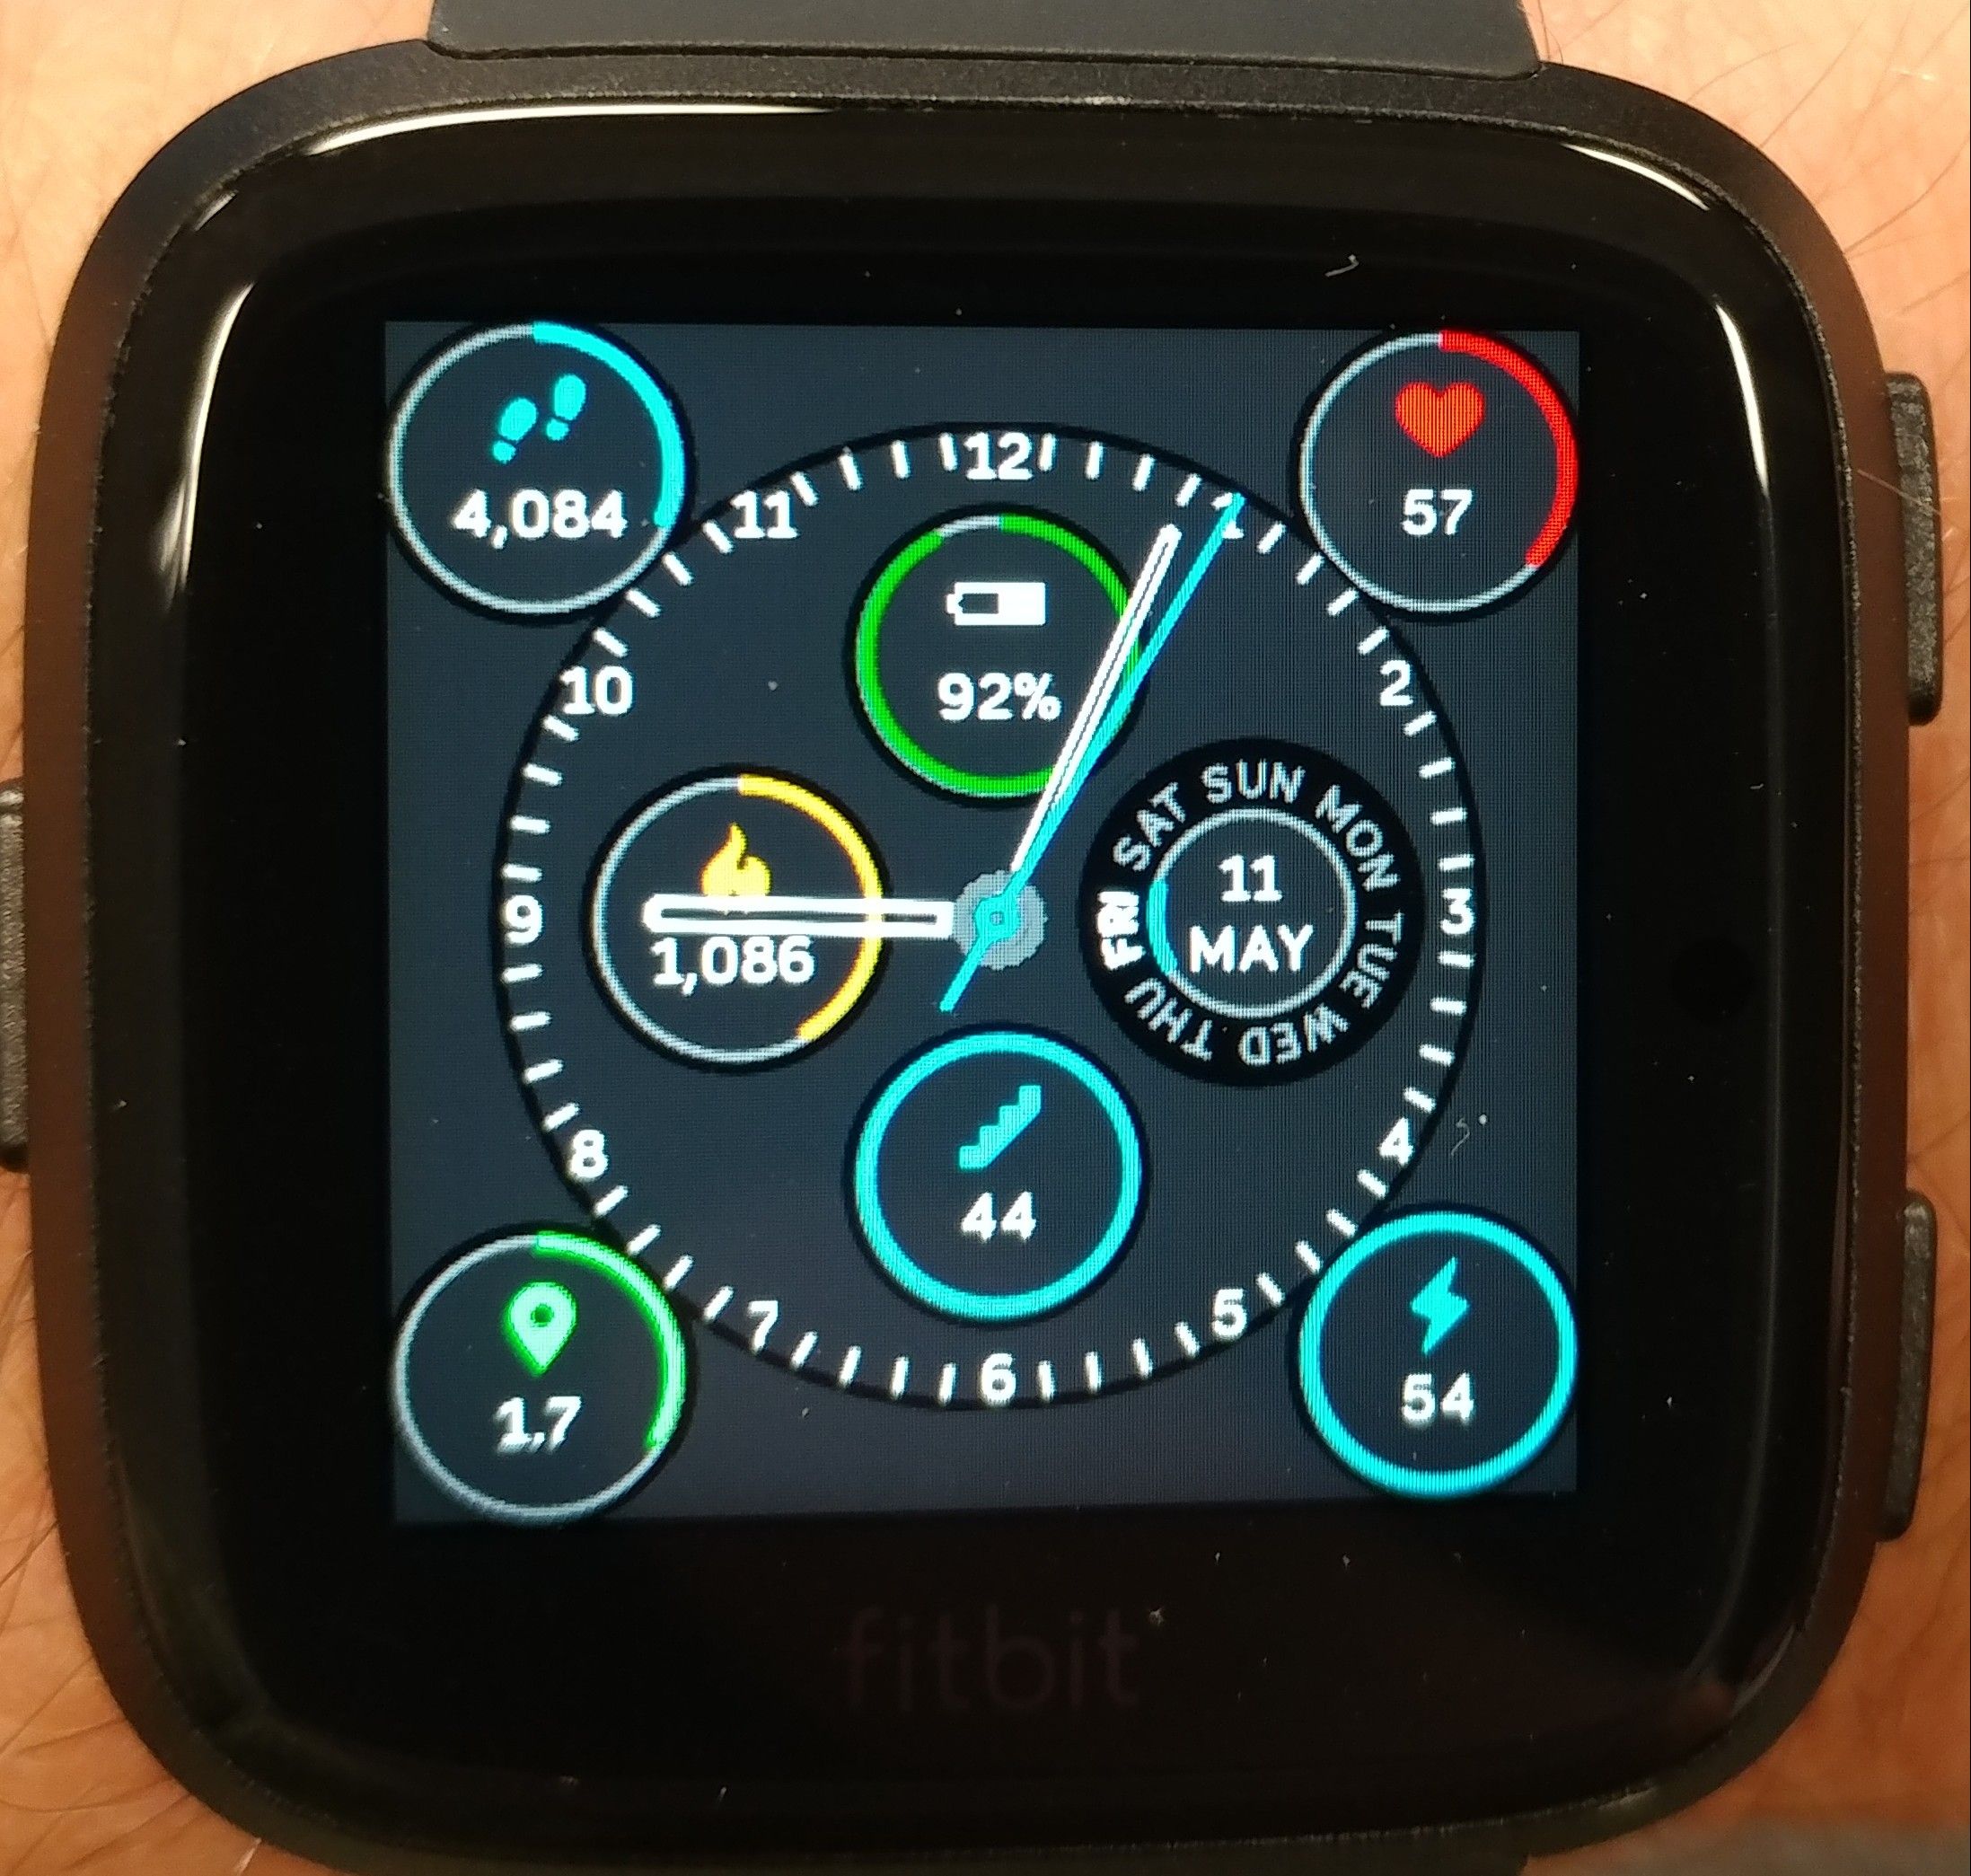 fitbit versa analog watch faces